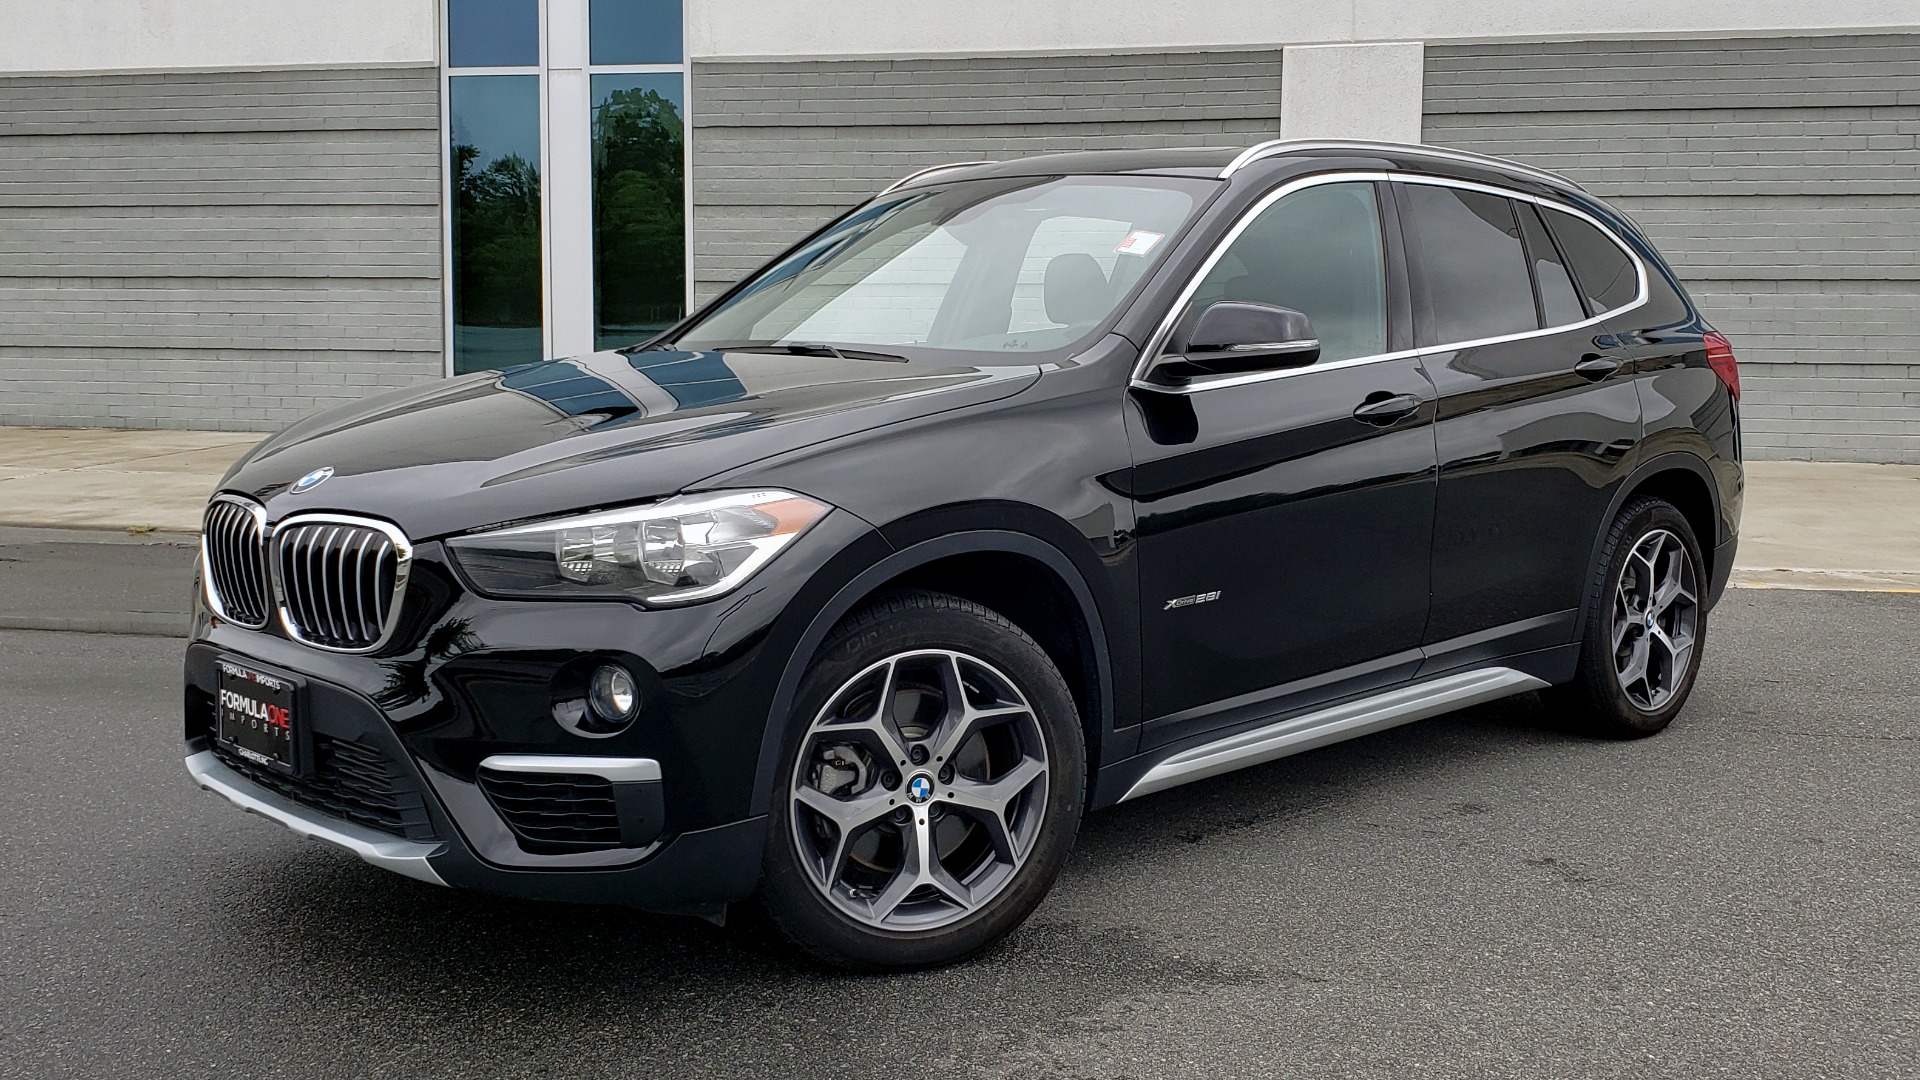 Used 2018 BMW X1 XDRIVE28I / CONV PKG / NAV / HTD STS / PANO-ROOF / 18IN WHLS / REARVIEW for sale Sold at Formula Imports in Charlotte NC 28227 1